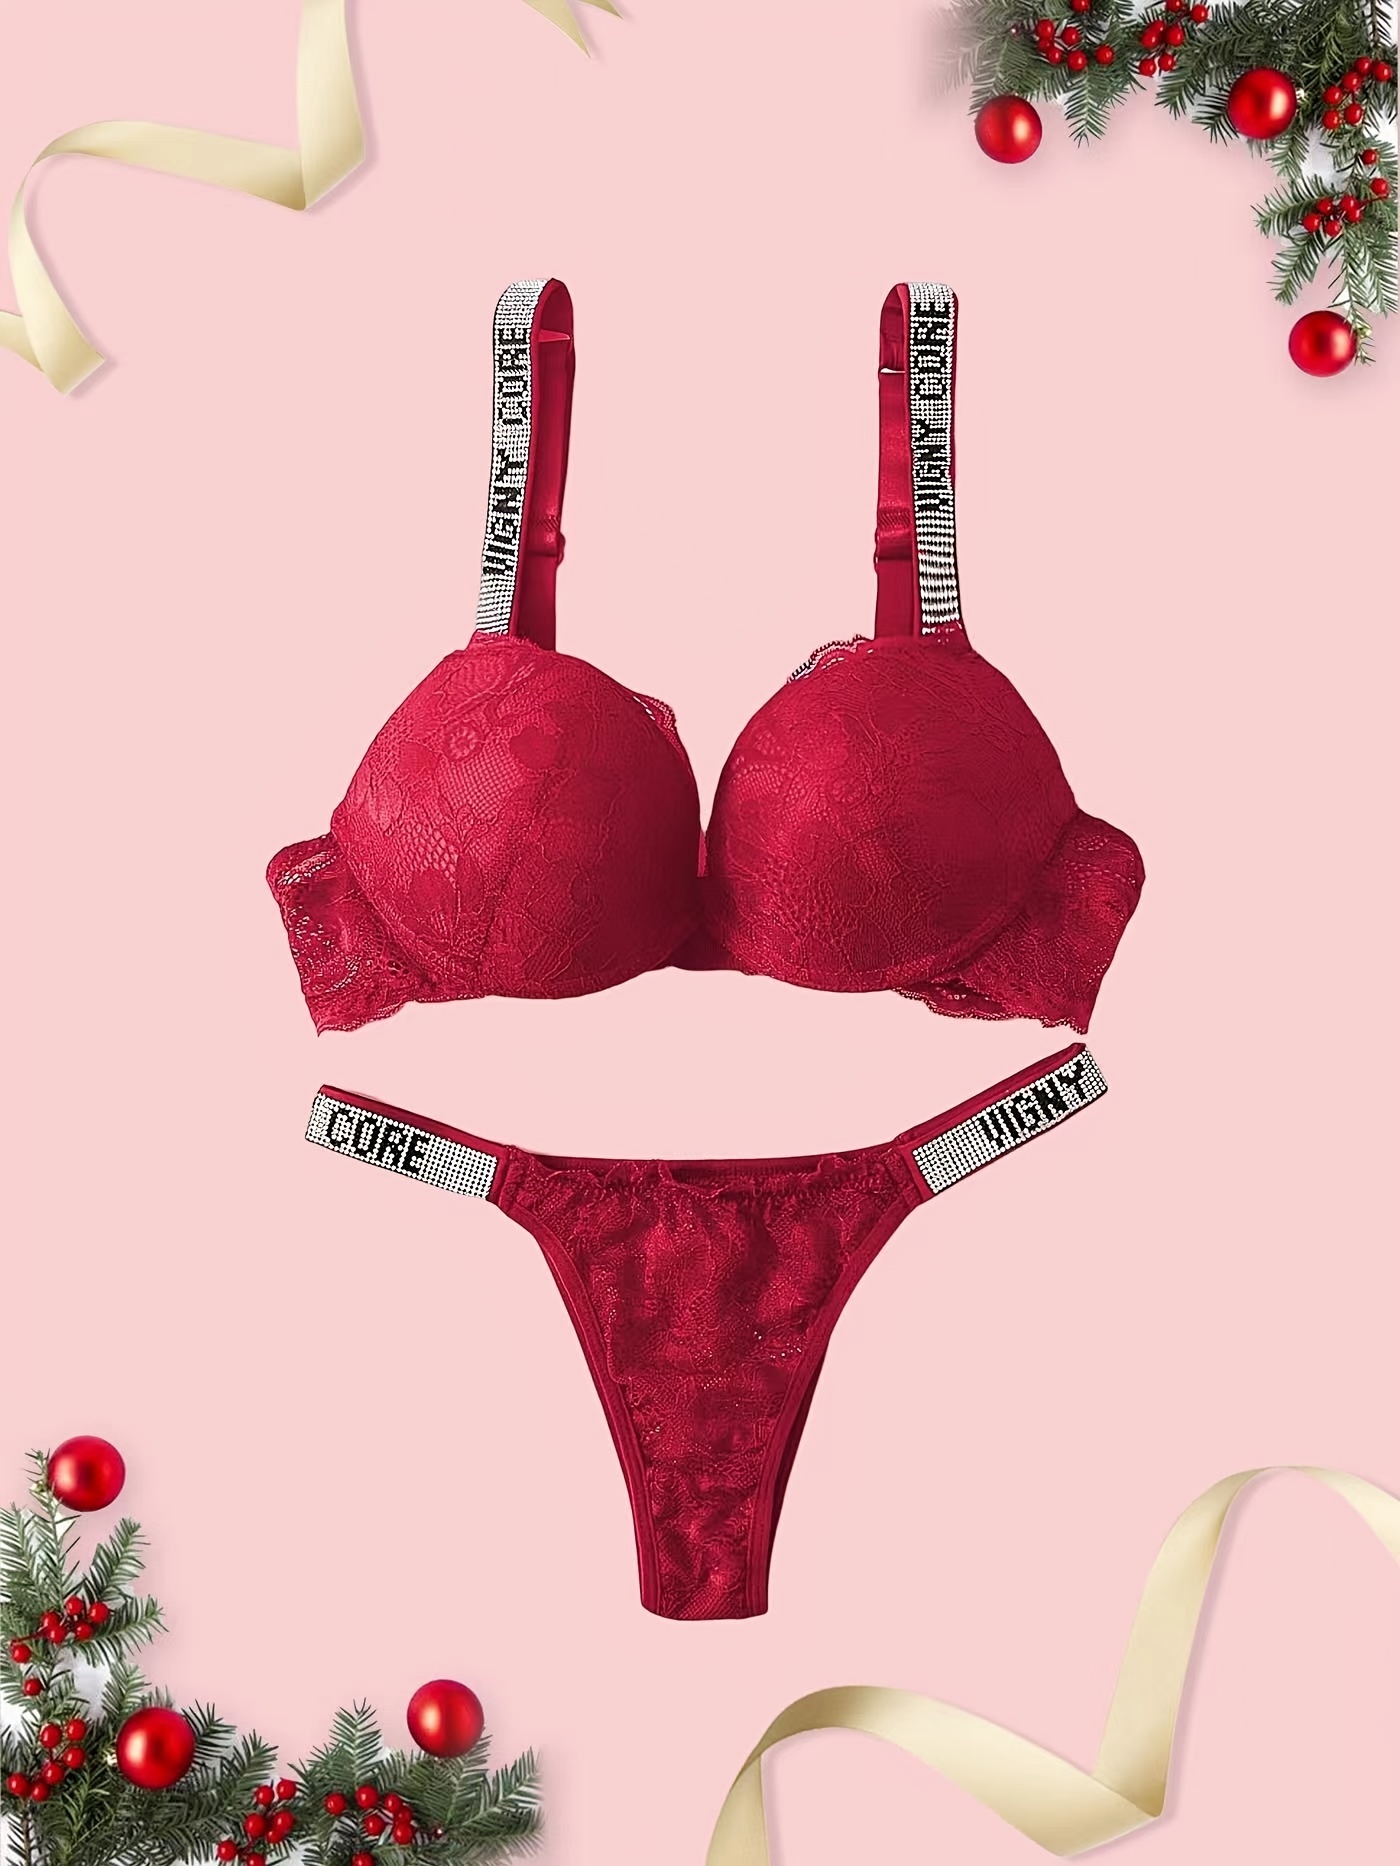 Womens Valentines Day Red Lace T Back Sexy Lingerie Panties With Rose  Pattern From Vivian5168, $0.7